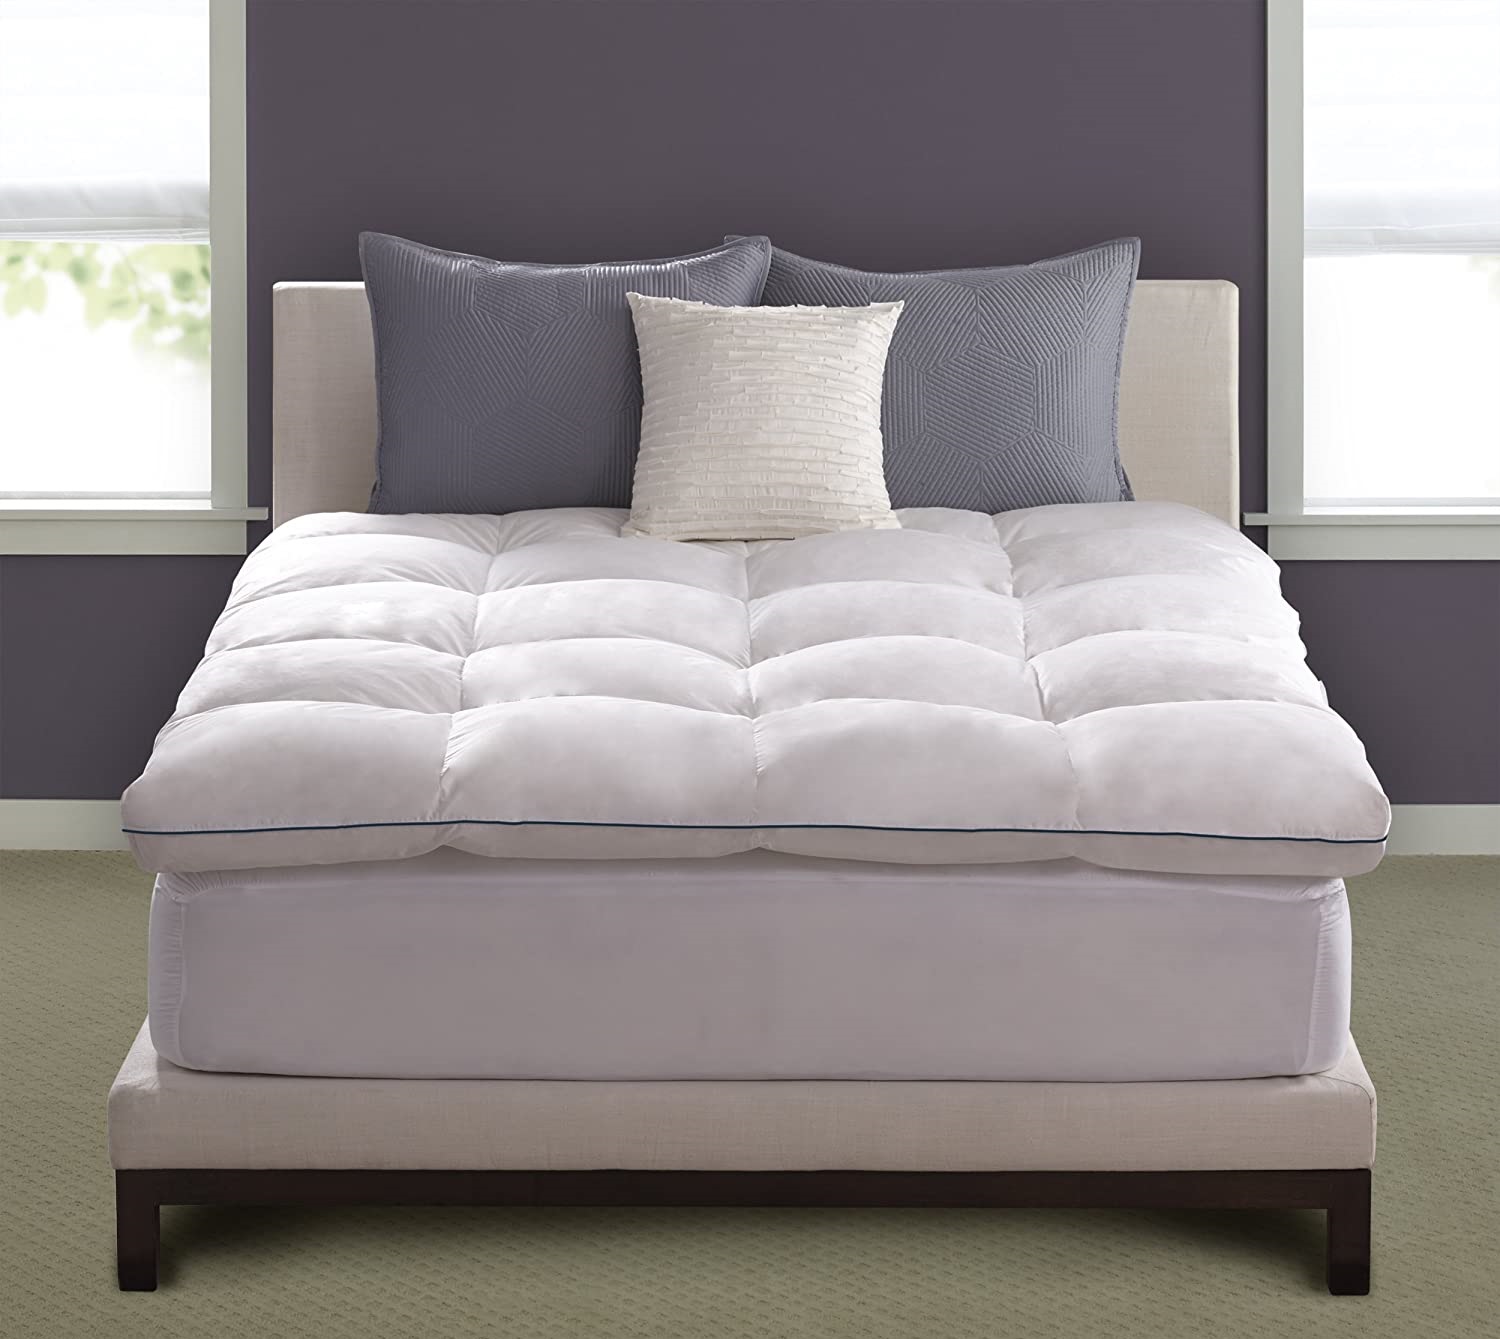 a white featherbed from Pacific Coast bedding with blue piping around the edges